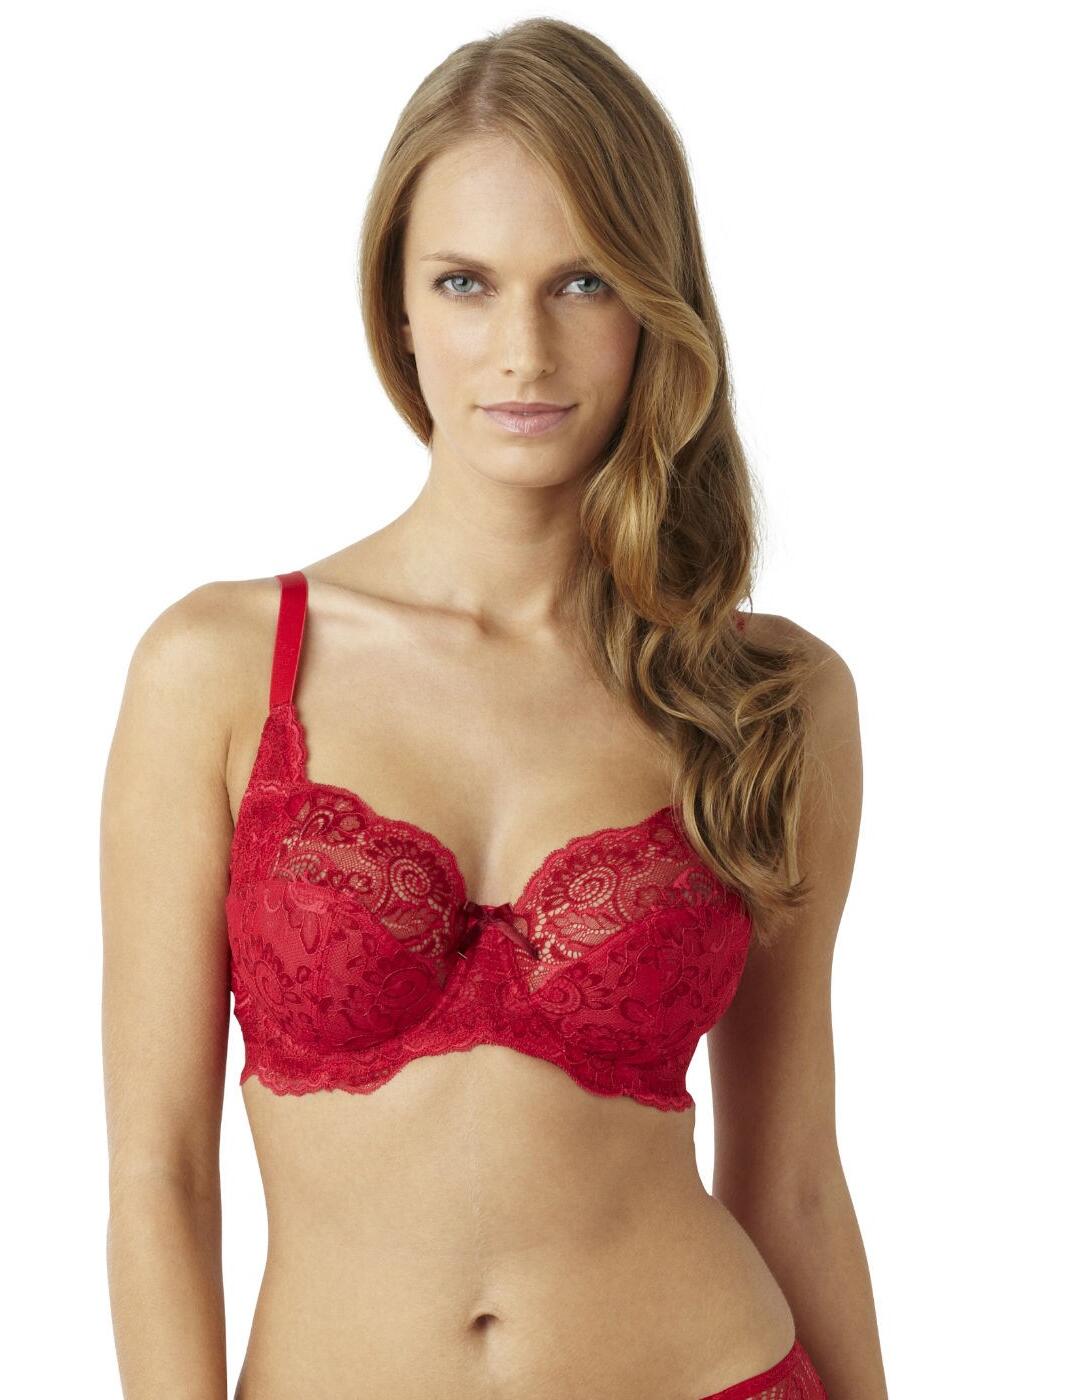 Panache Lingerie - The Andorra Full Cup Bra is a lingerie